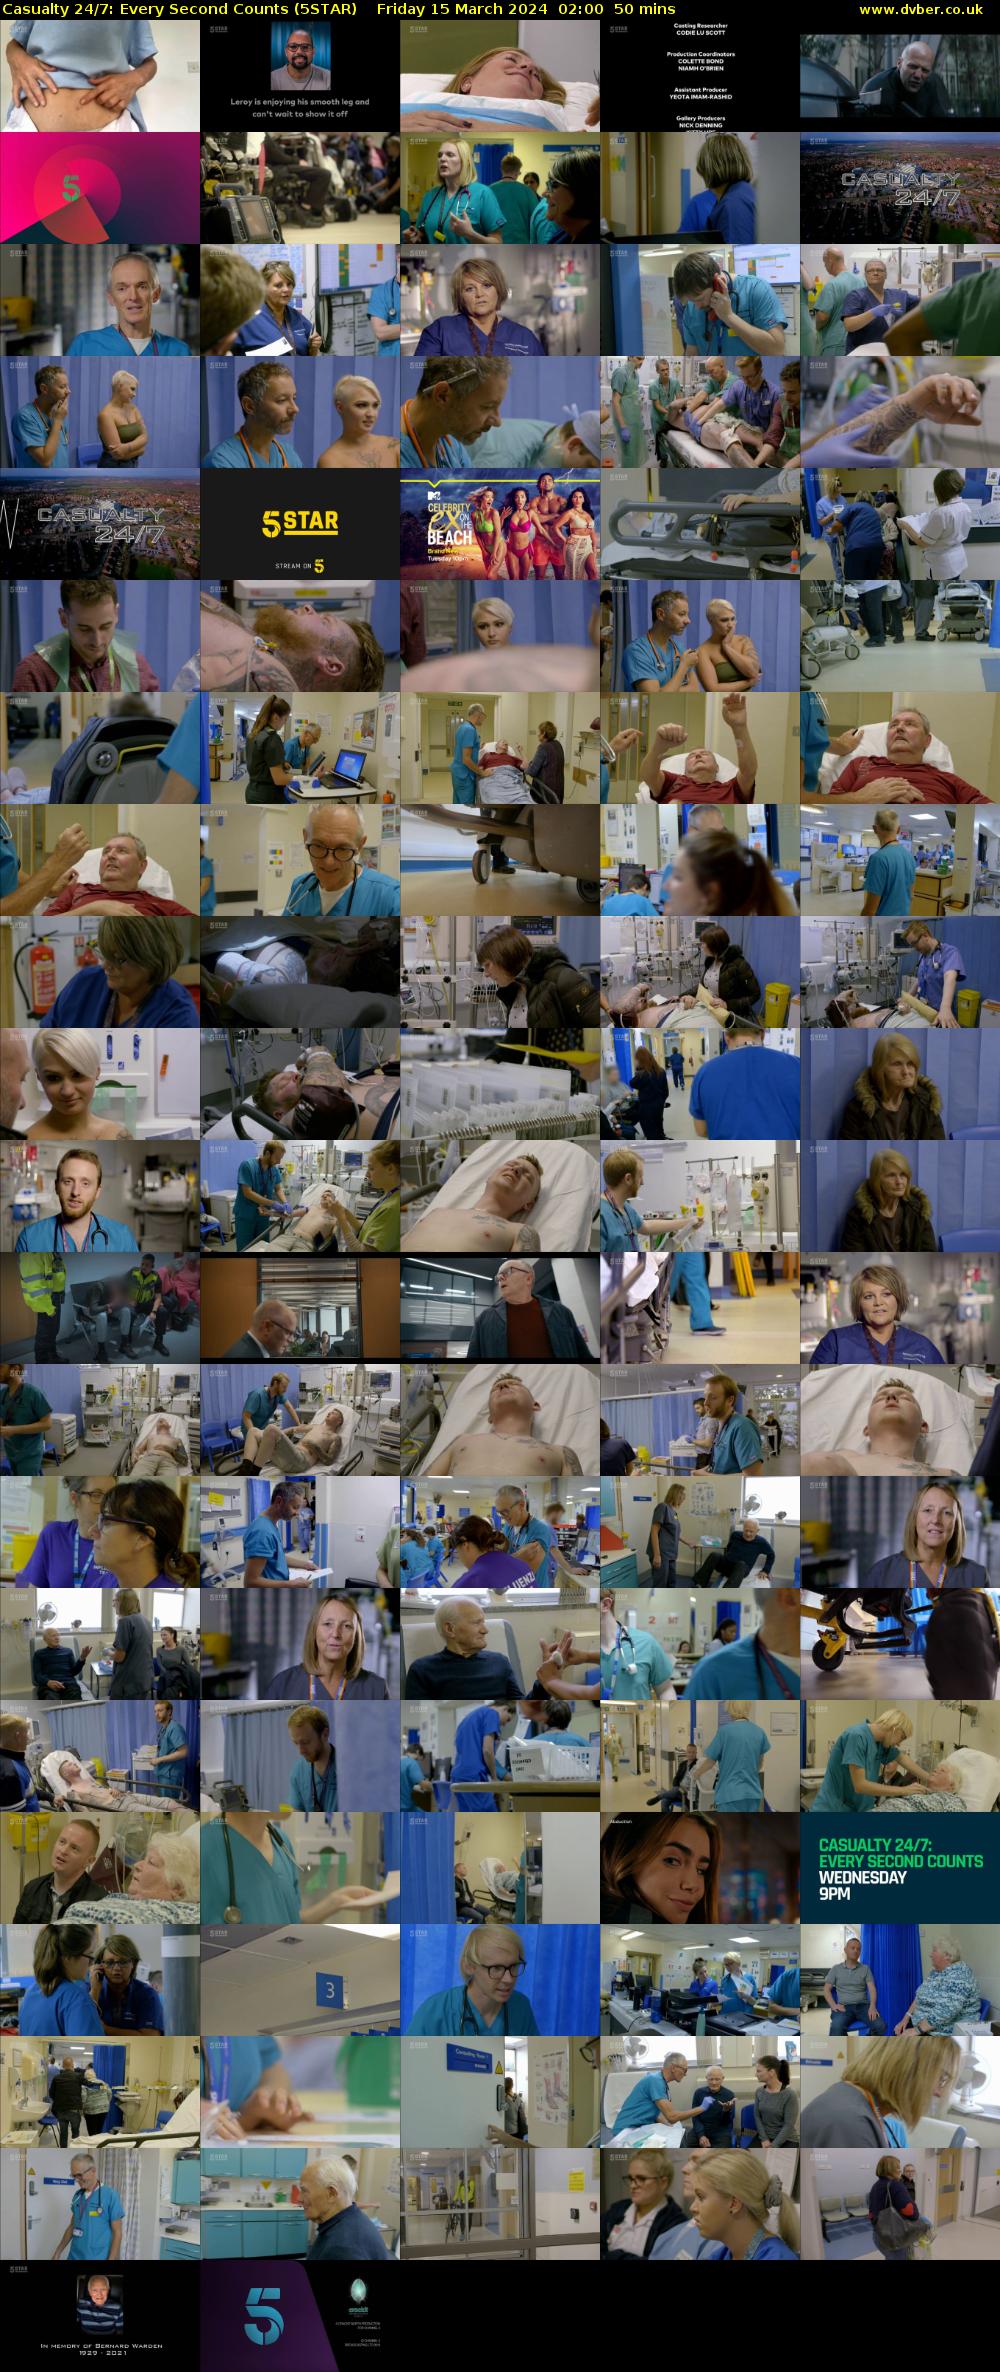 Casualty 24/7: Every Second Counts (5STAR) Friday 15 March 2024 02:00 - 02:50